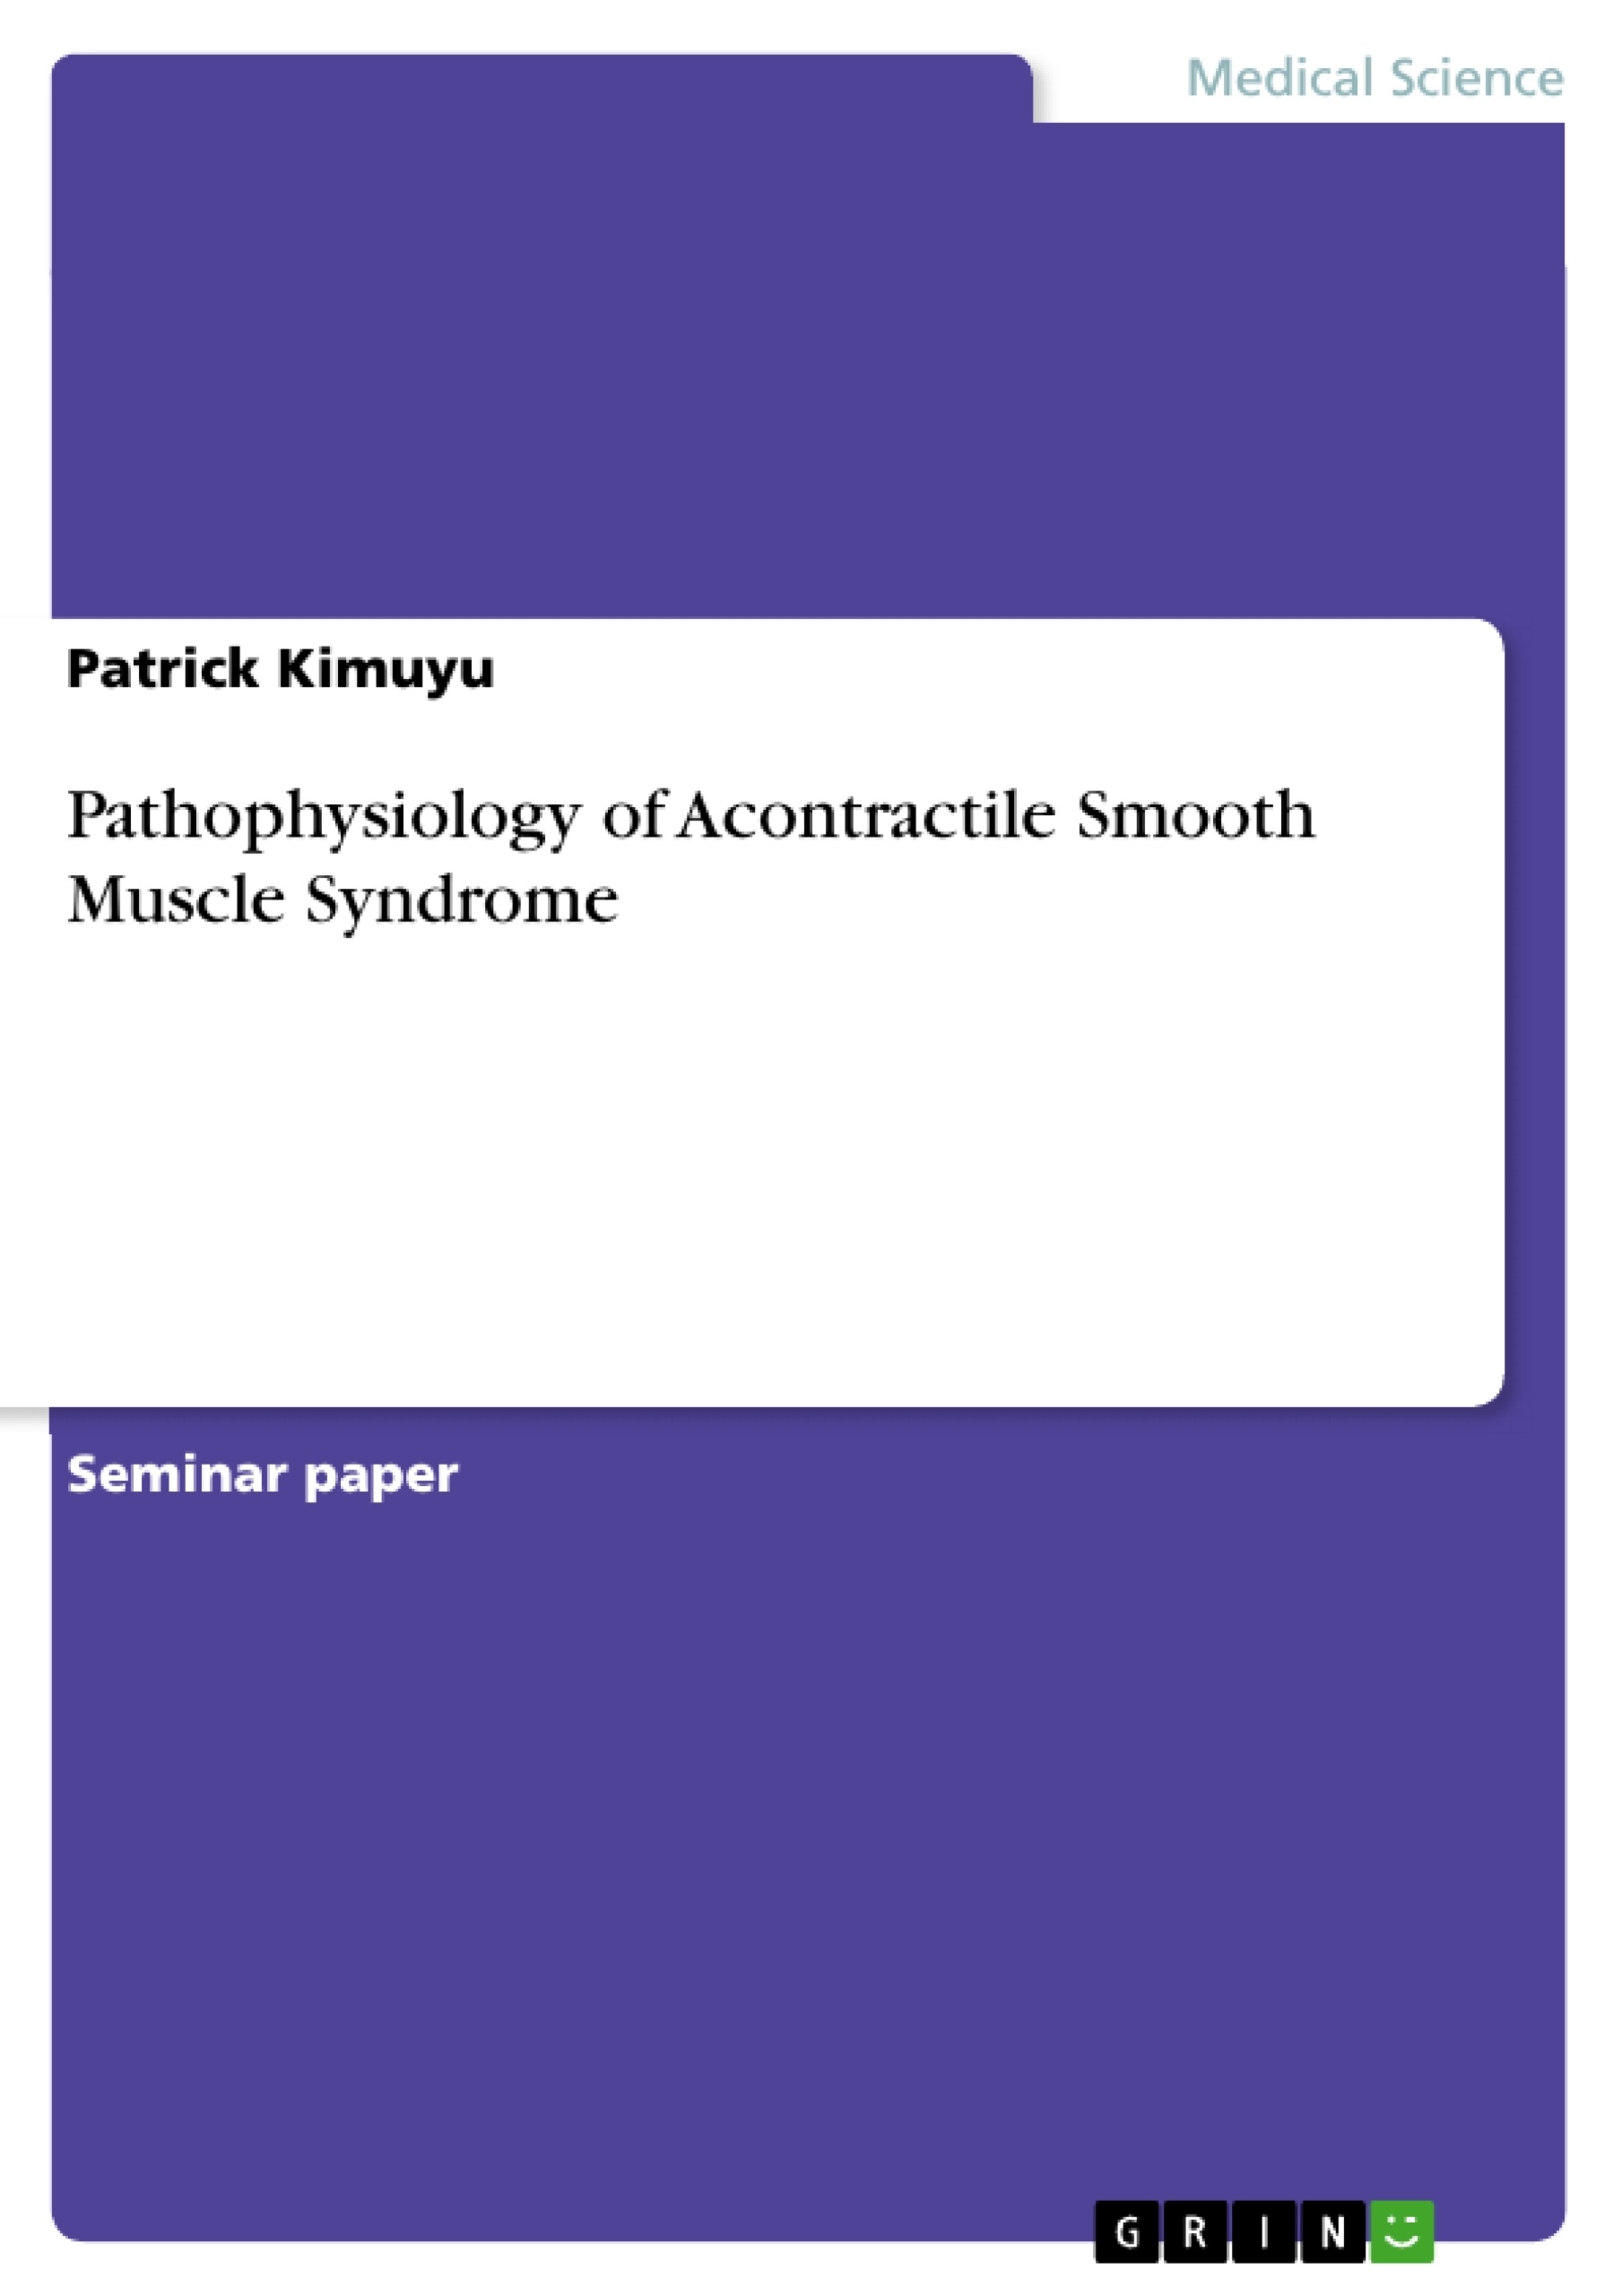 Titre: Pathophysiology of Acontractile Smooth Muscle Syndrome